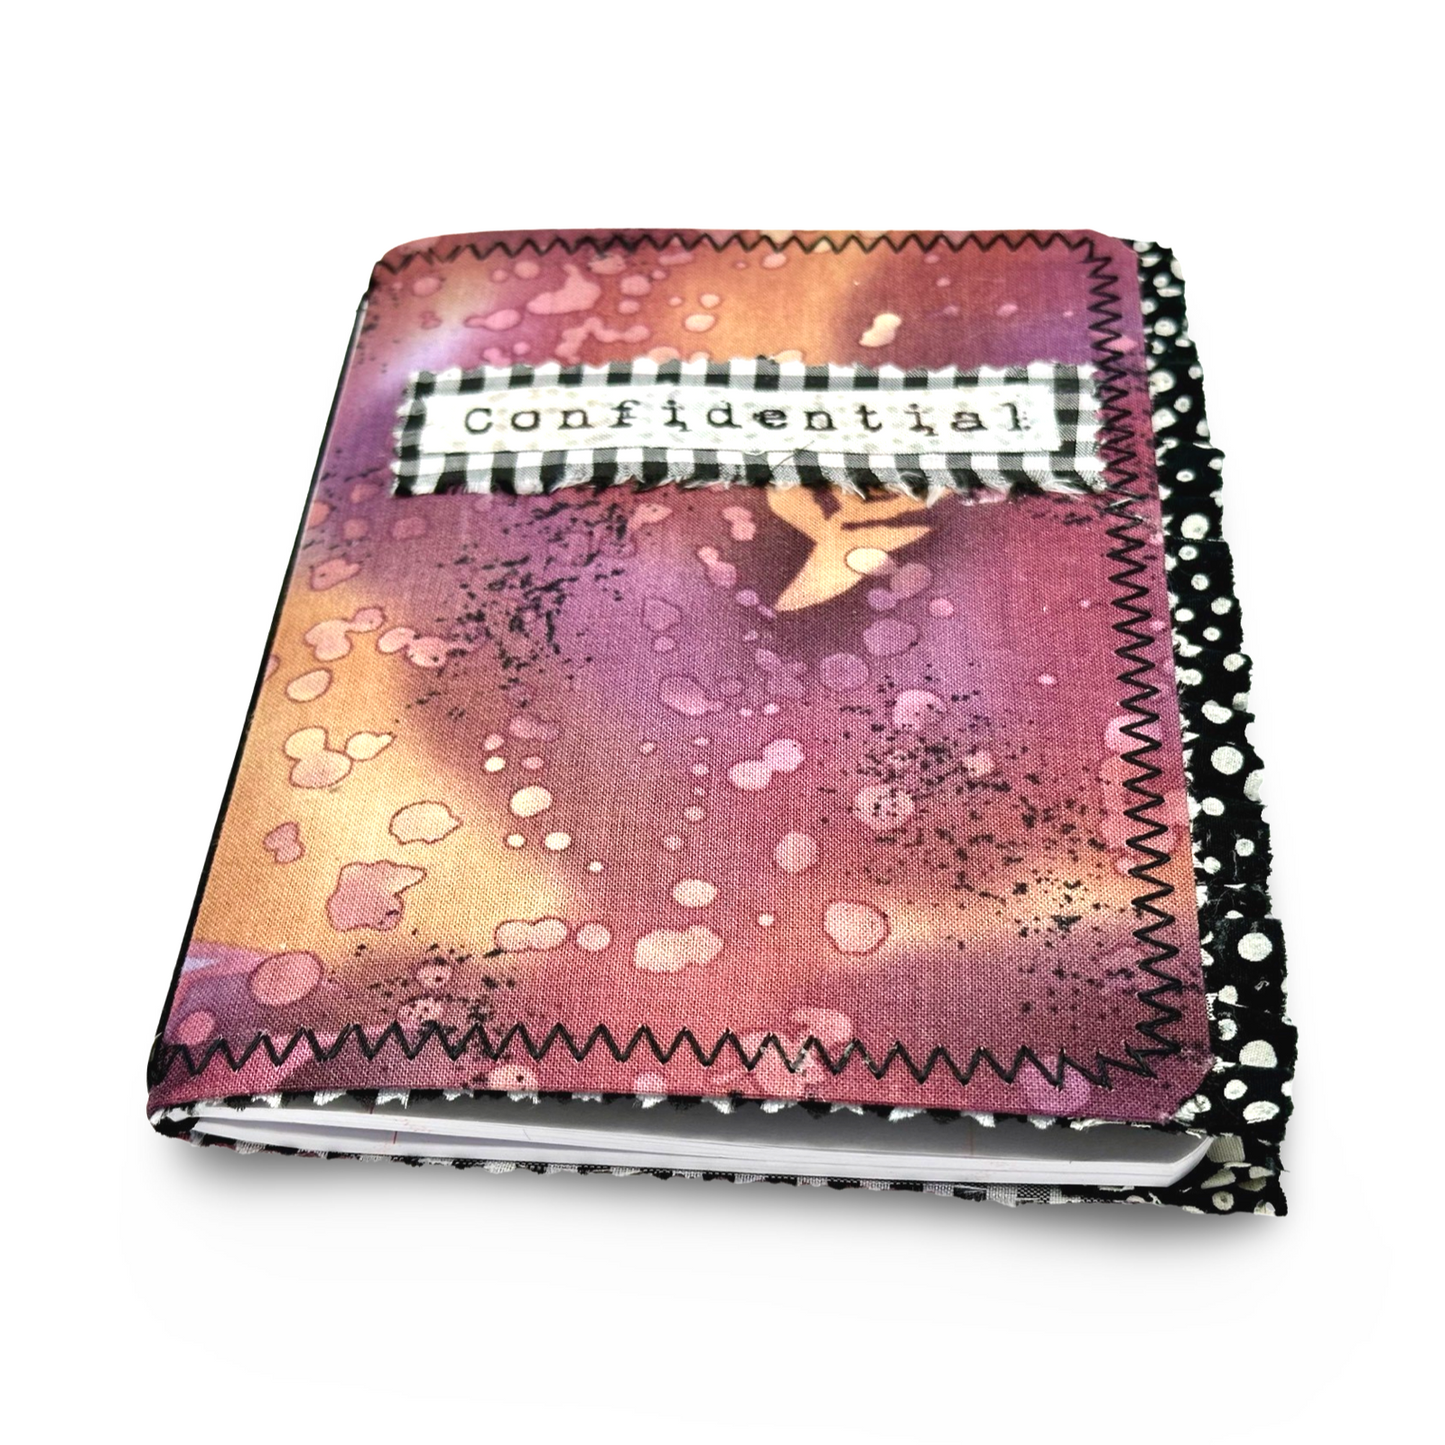 Blessed Sevenfold Medium Composition Book - Refillable